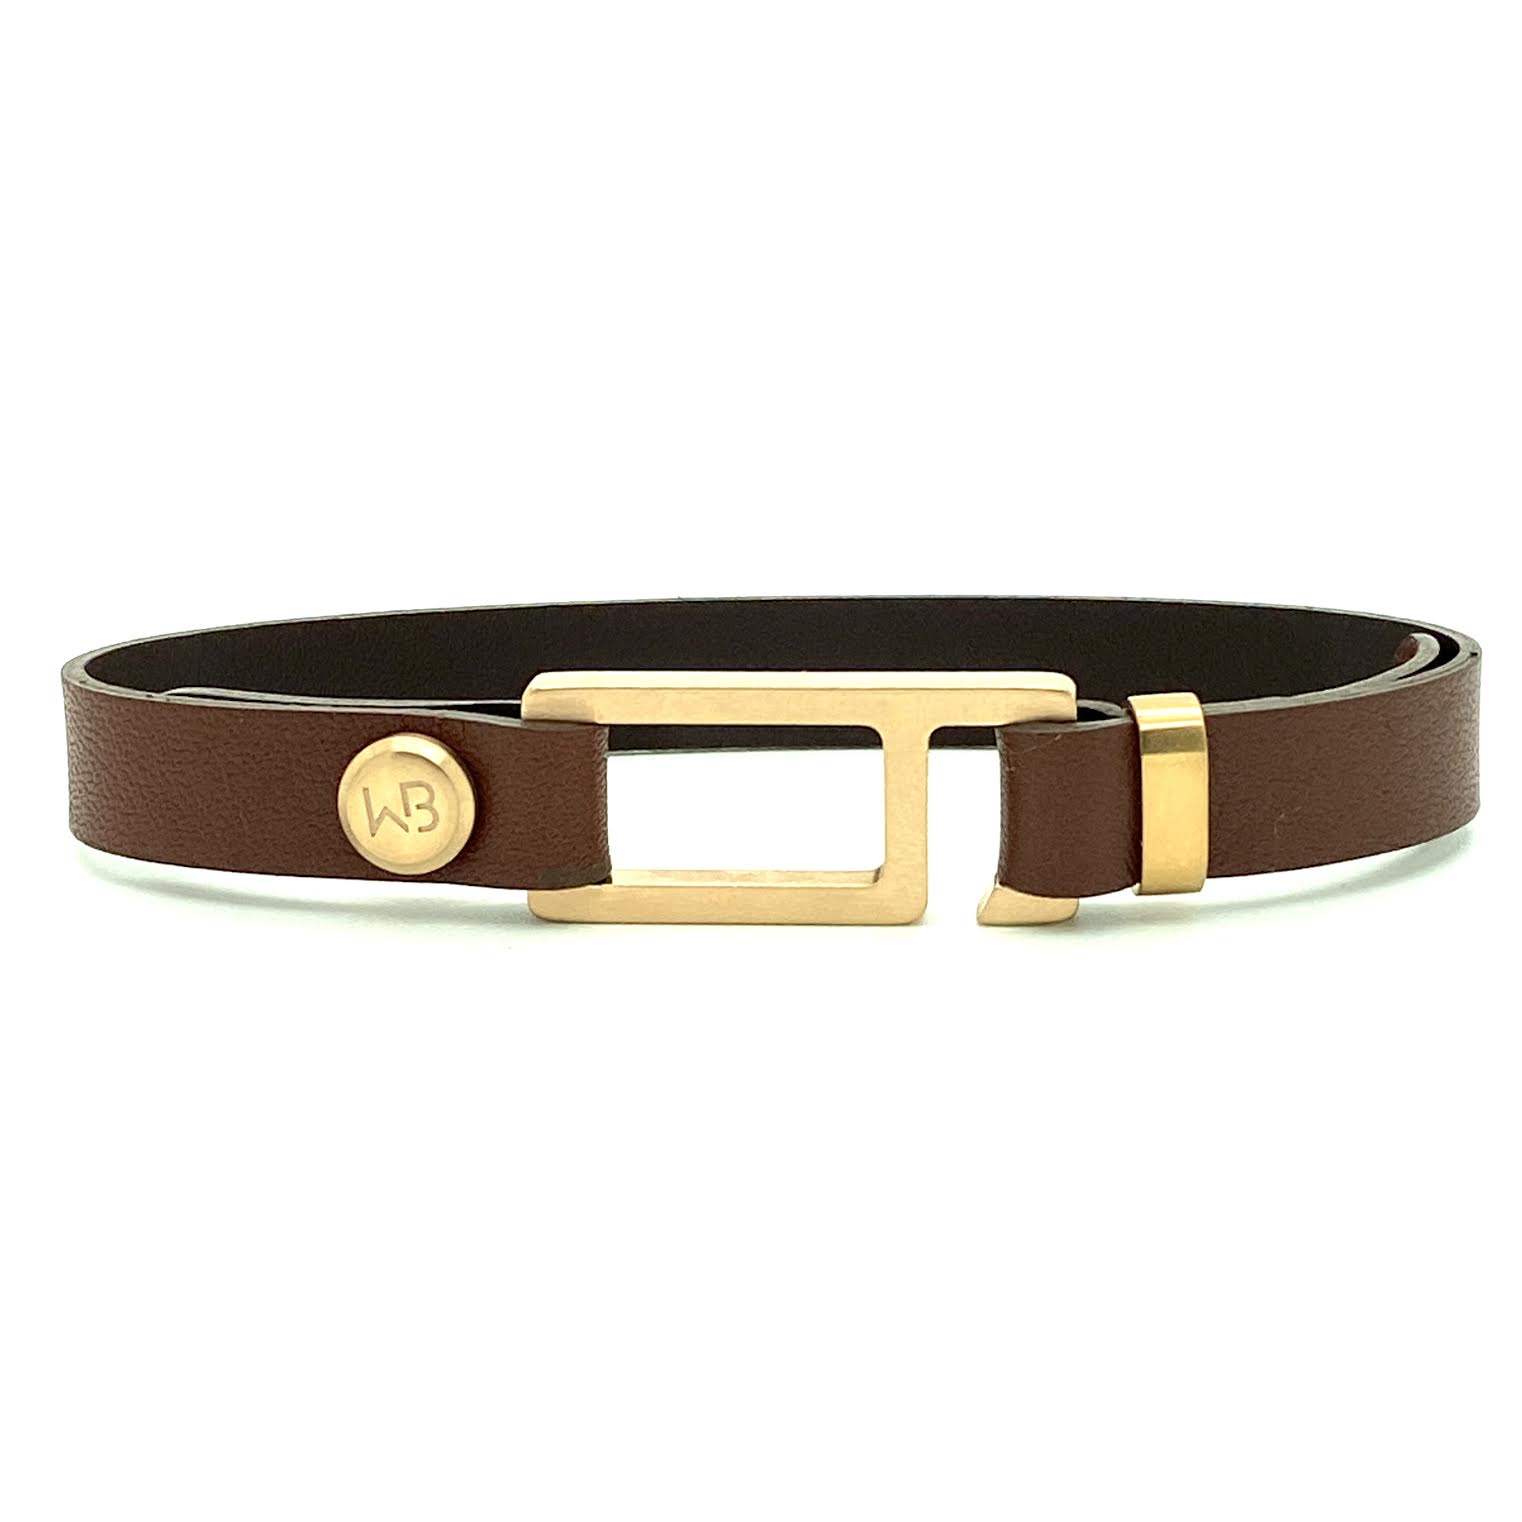 Our striking cinnamon brown Italian leather bracelet is paired perfectly with our artisan designed, lightly brushed hardware. Your hardware choices include Rose Gold, Yellow Gold, Stainless Steel or Black Ceramic. This adjustable size bracelet is a distinctive piece worn alone or with a WristBend stacking bracelet. Made by WristBend